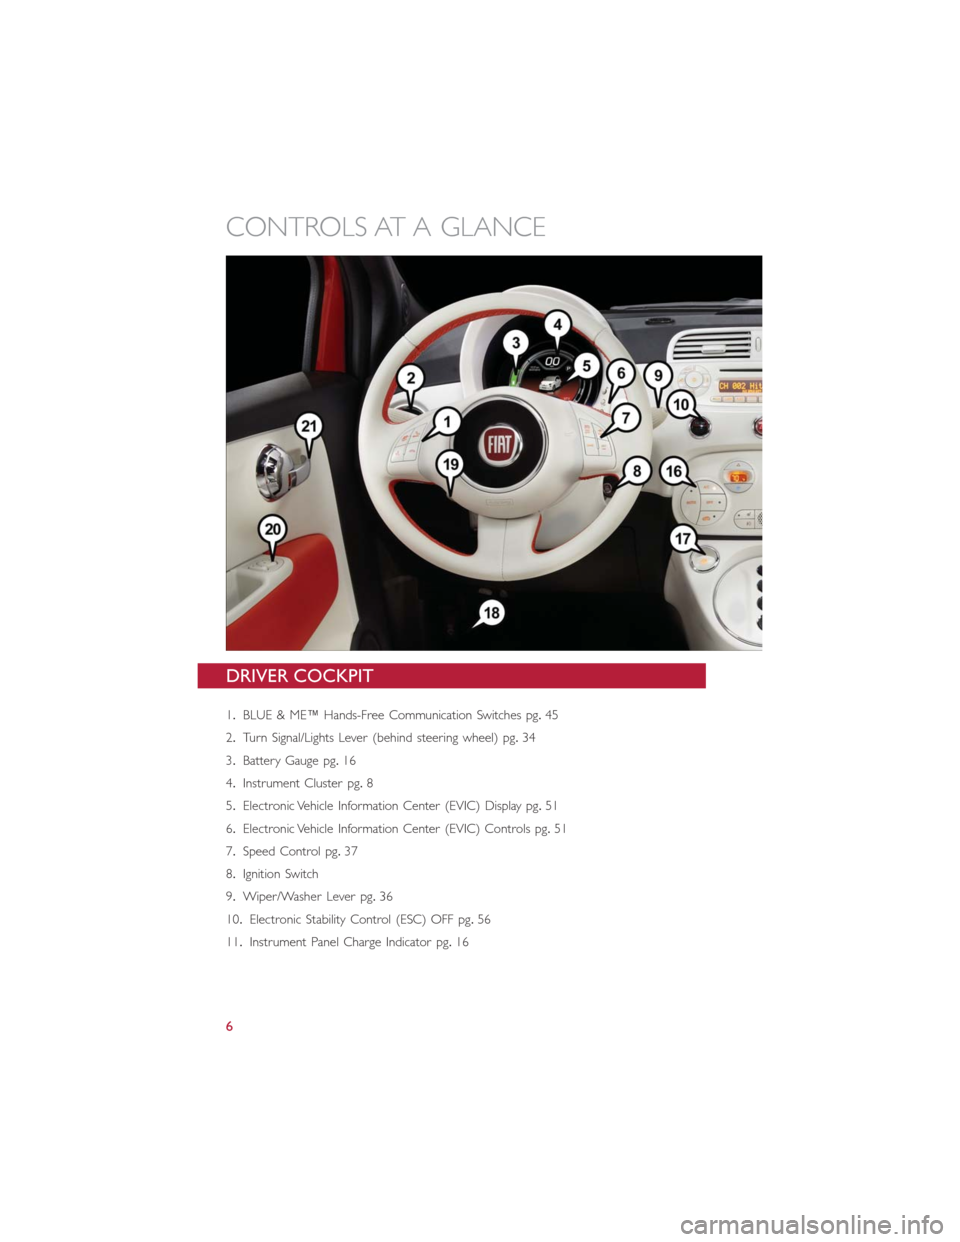 FIAT 500E 2014 2.G User Guide DRIVER COCKPIT
1.BLUE & ME™ Hands-Free Communication Switches pg.45
2.Turn Signal/Lights Lever (behind steering wheel) pg.34
3.Battery Gauge pg.16
4.Instrument Cluster pg.8
5.Electronic Vehicle Info